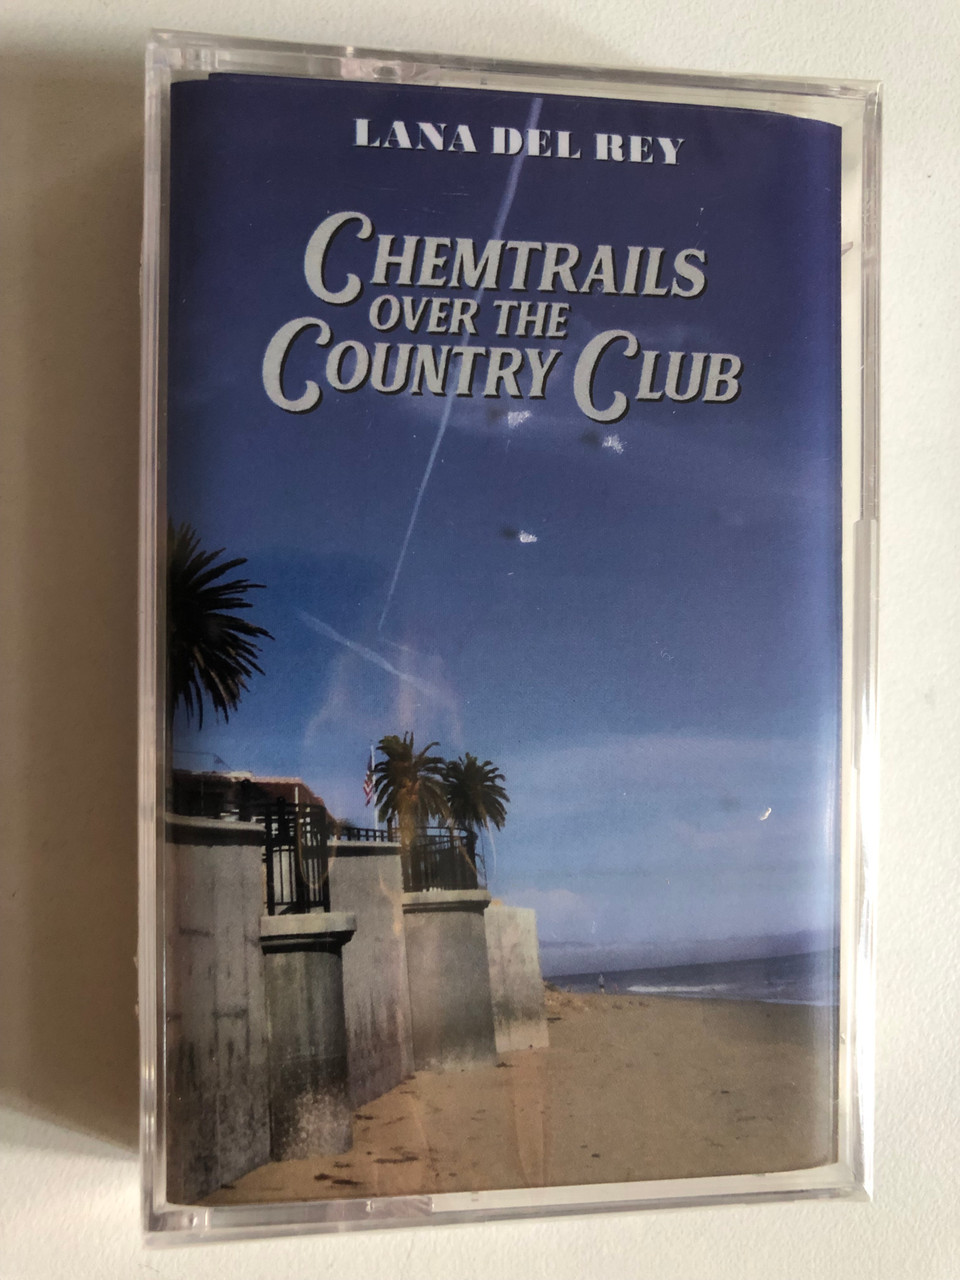 https://cdn10.bigcommerce.com/s-62bdpkt7pb/products/0/images/313893/Lana_Del_Rey_Chemtrails_Over_The_Country_Club_Polydor_Audio_Cassette_2021_3549150_1__45720.1701162781.1280.1280.JPG?c=2